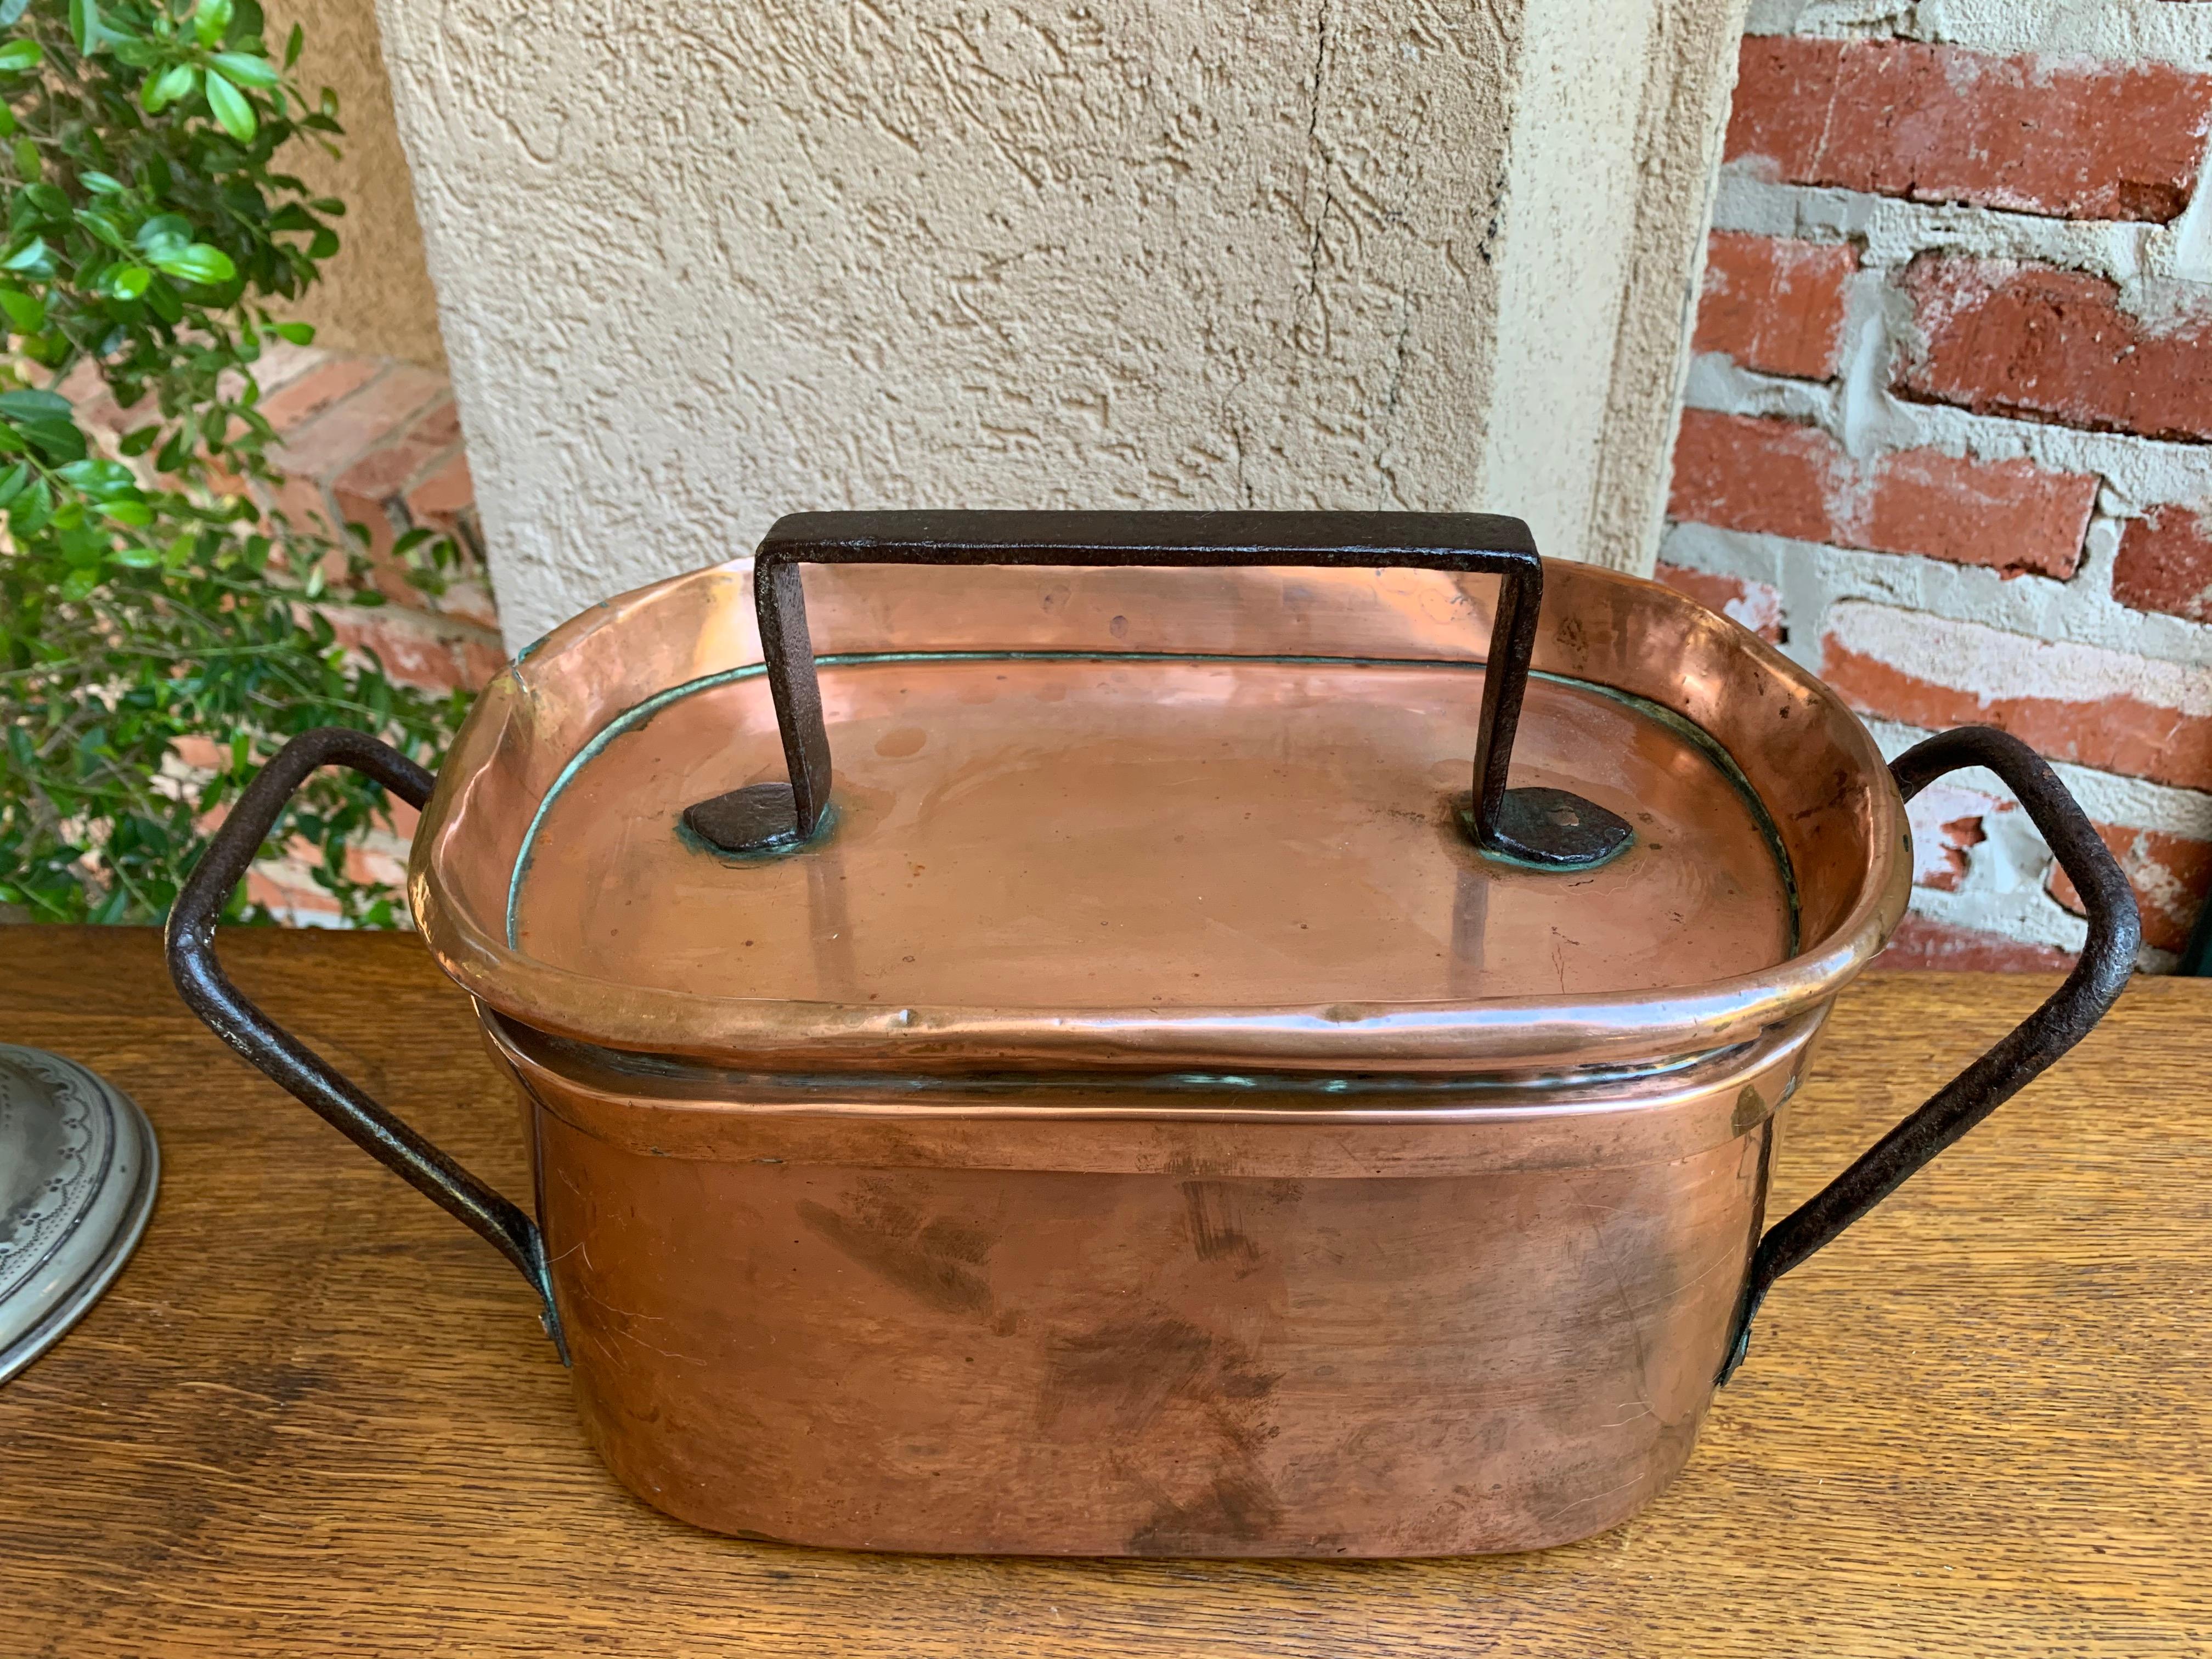 French Provincial 19th Century French Polished Copper and Iron Pot Pan Cooking Dish Lid